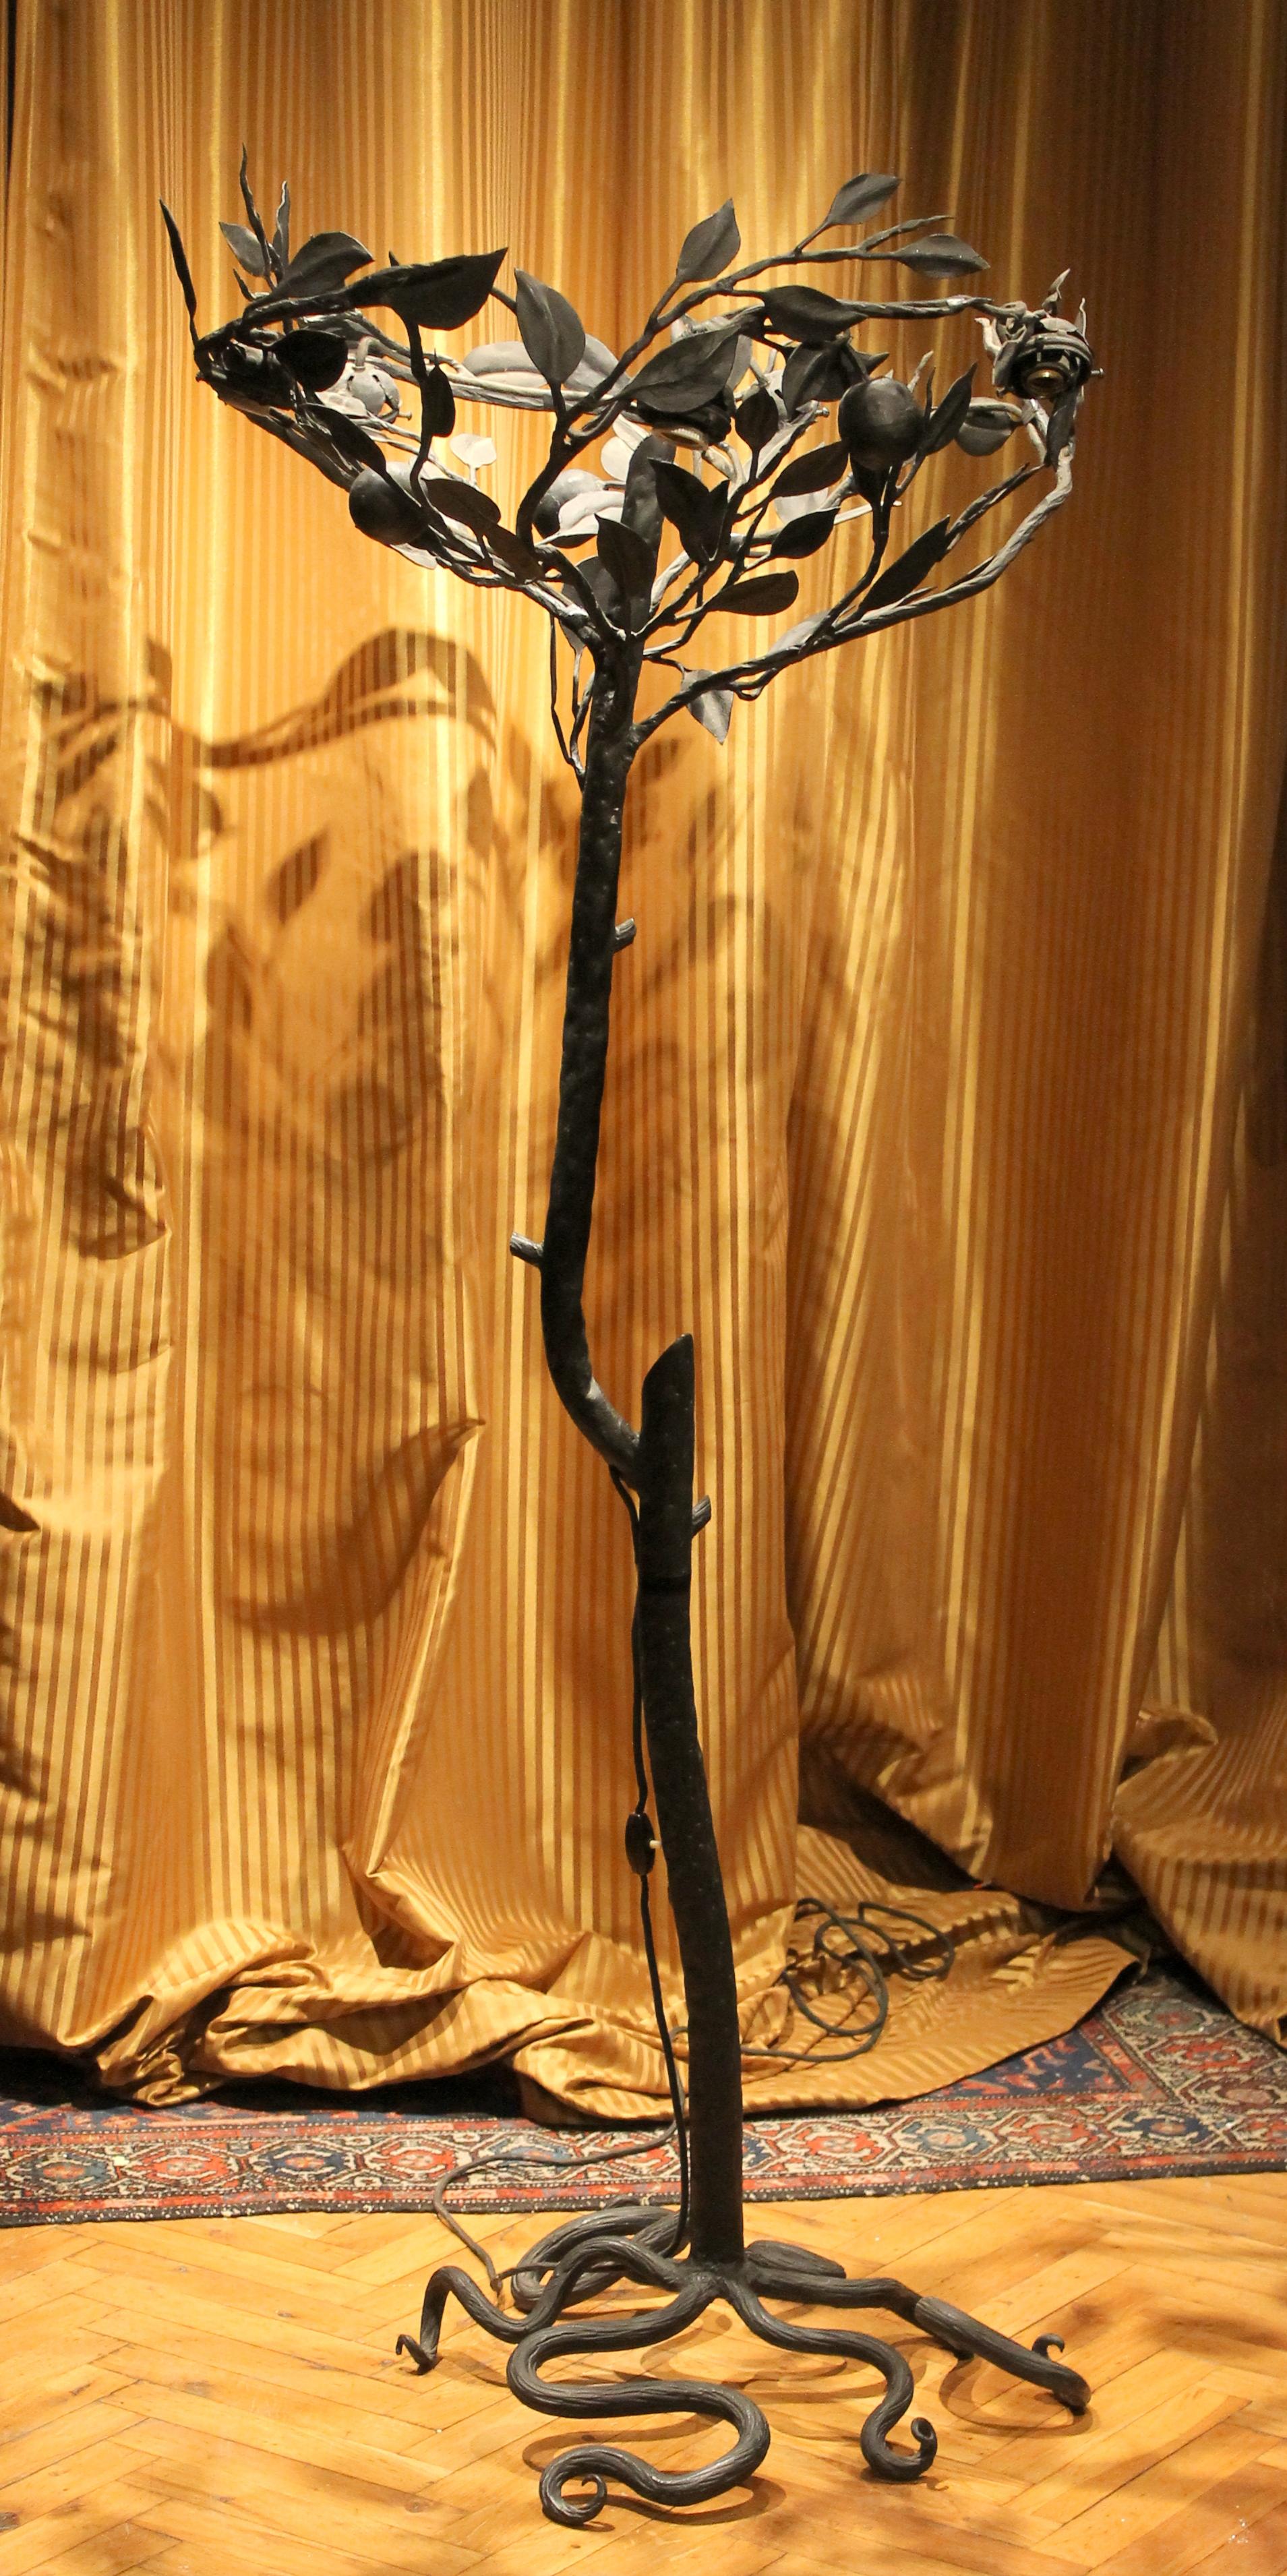 Hand-Crafted Italian Wrought Iron Tree Floor Lamp with Blown Glass Lemons Shape Shades, 1930s